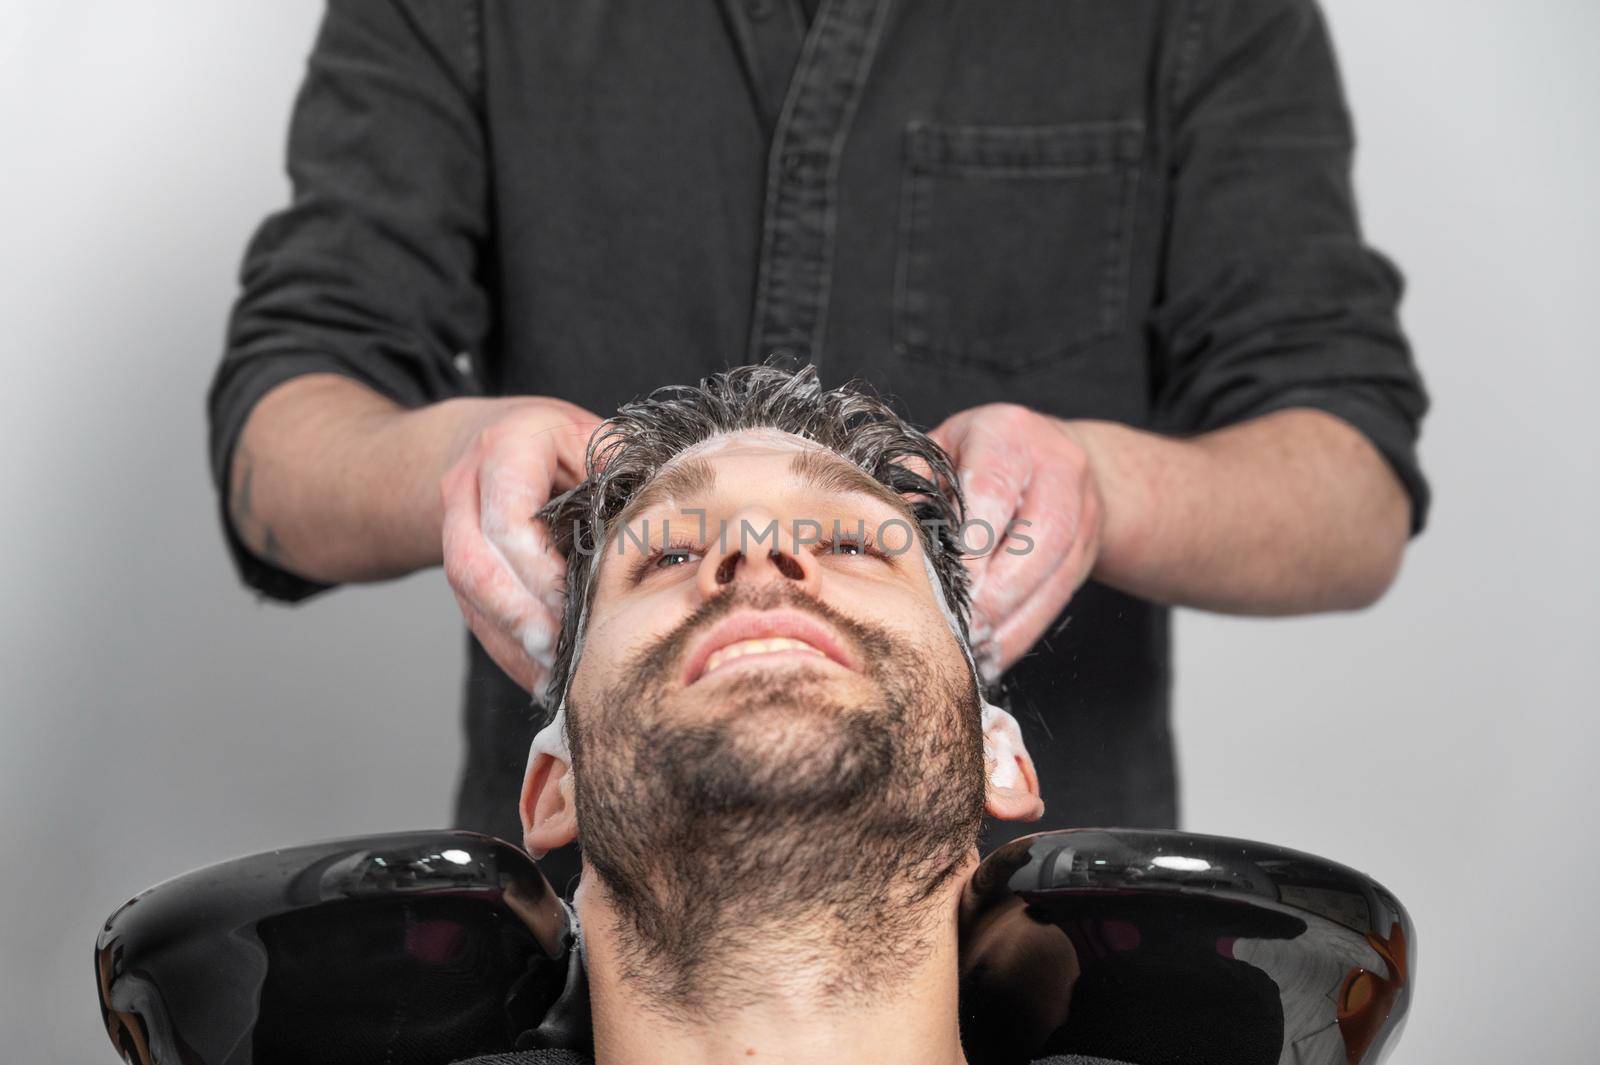 Barber shop. Hairdresser man washes client head in barbershop. High quality photography